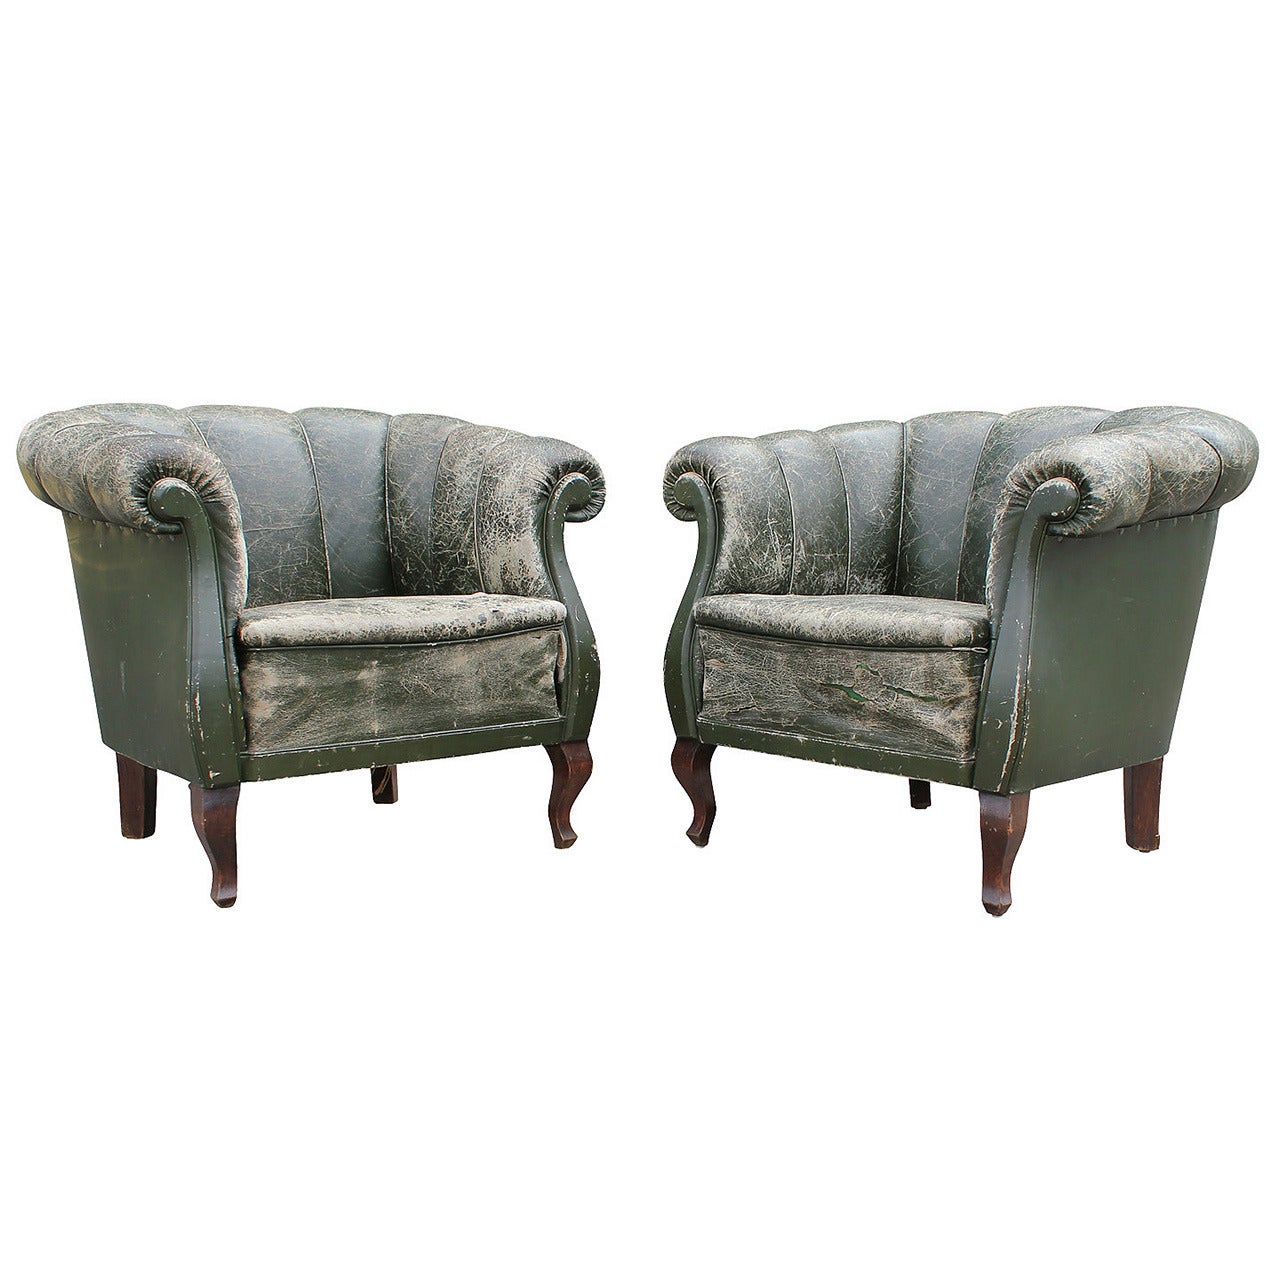 Perfectly Patinated Pair Club Chairs in Aged Green Leather